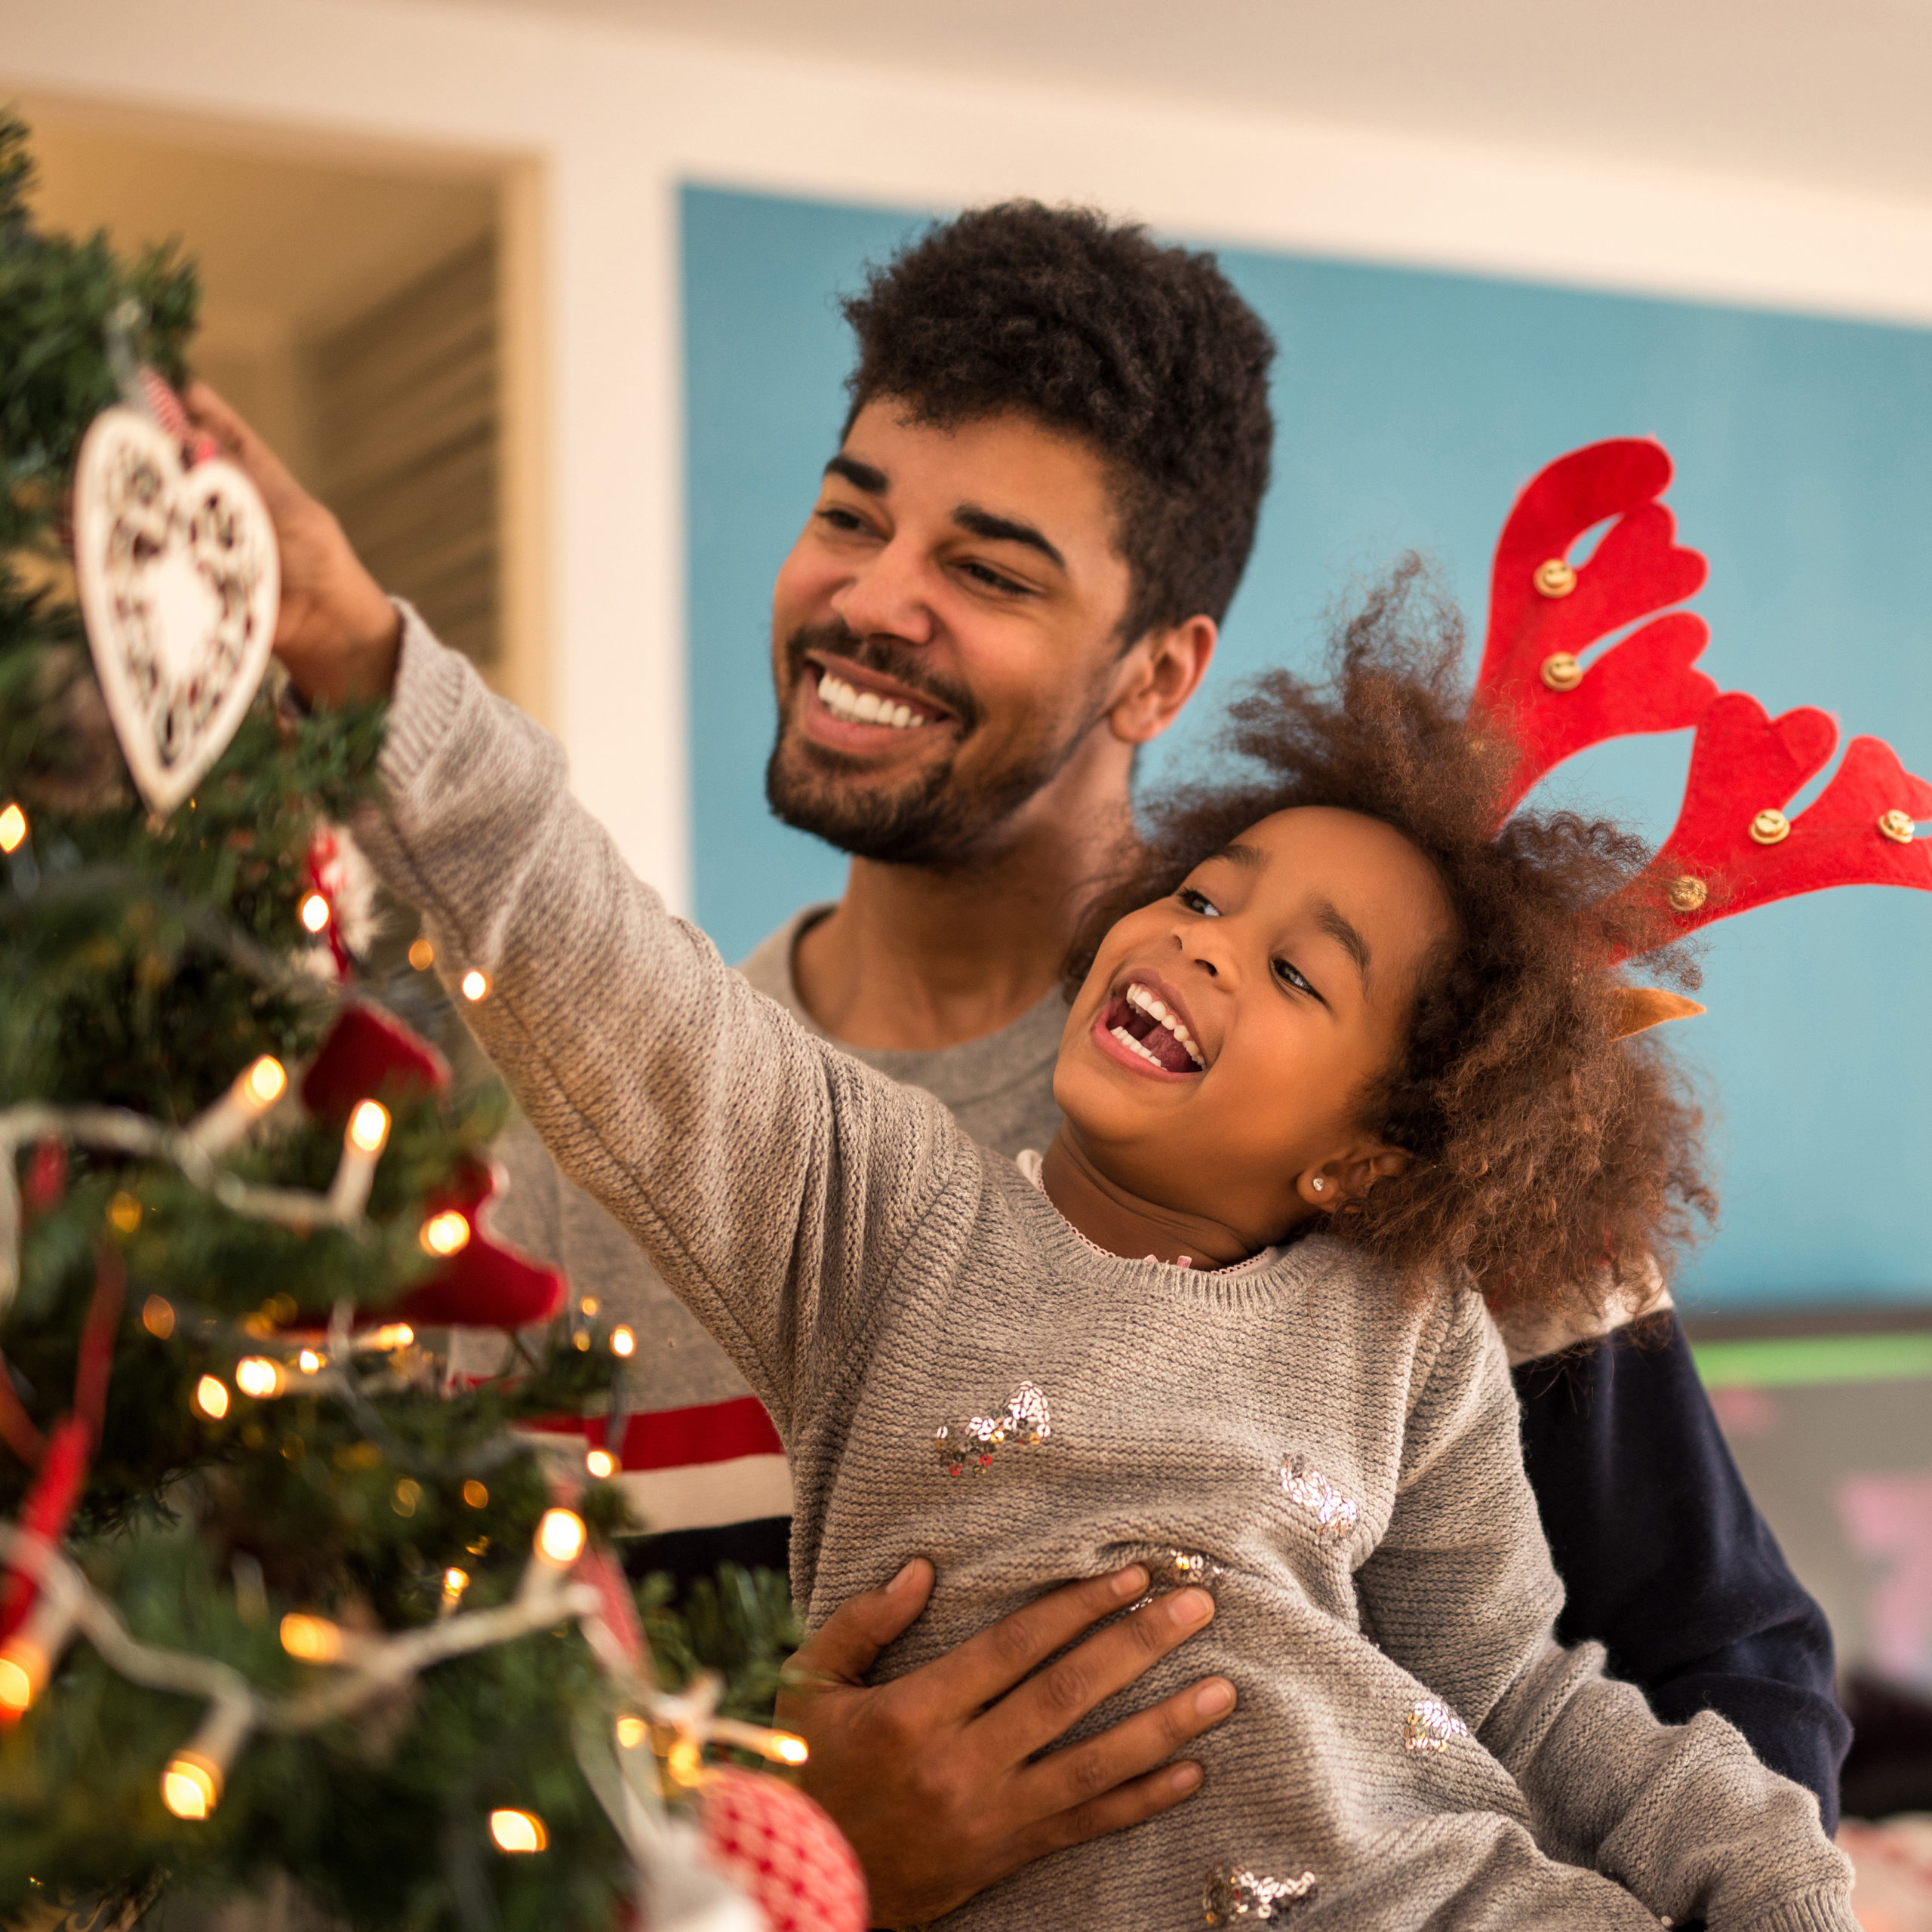 Cute african american girl decorating Christmas tree with dad.